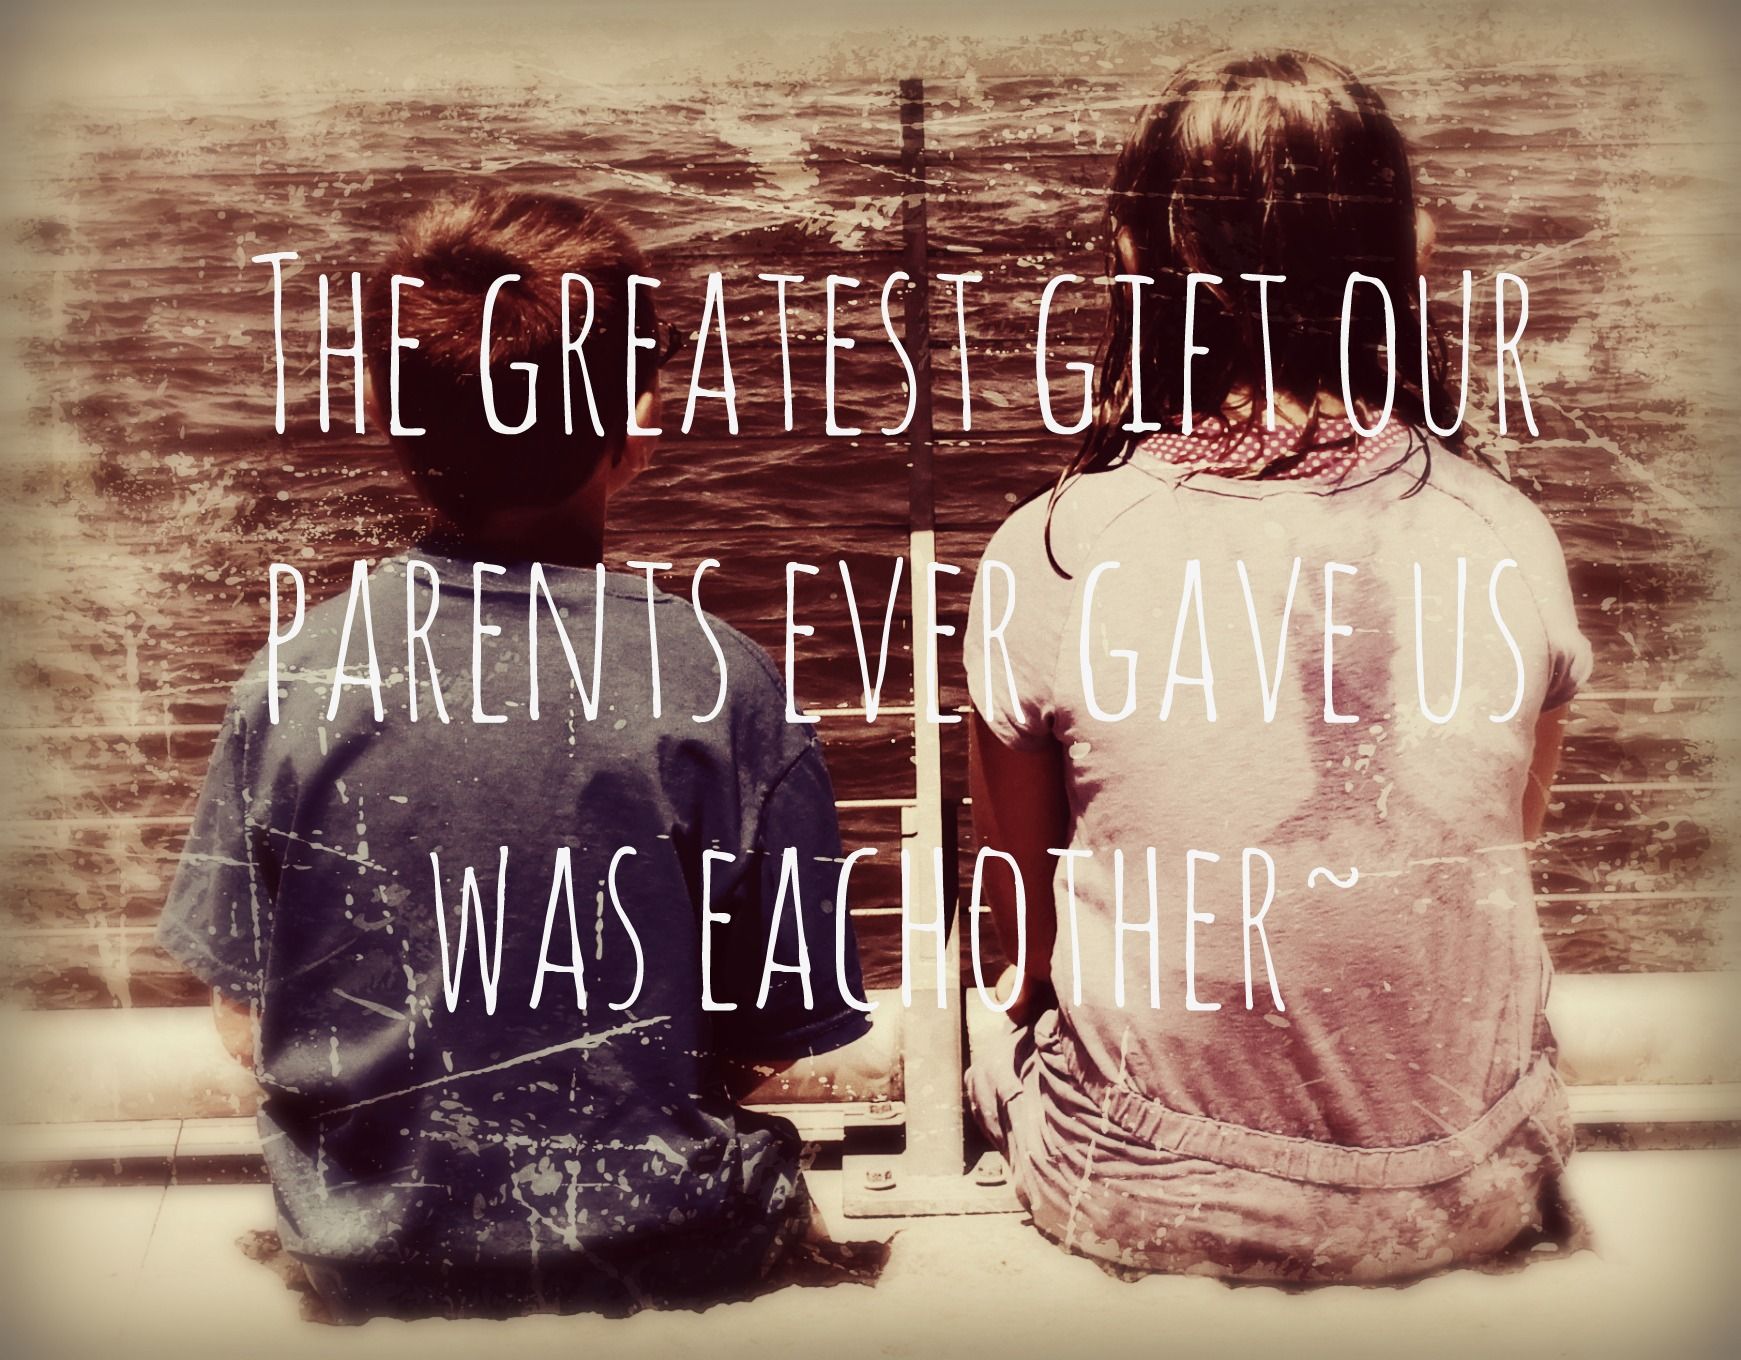 Brother And Sister Quotes Tumblr - Greatest Gift Our Parents Gave Us - 1741...